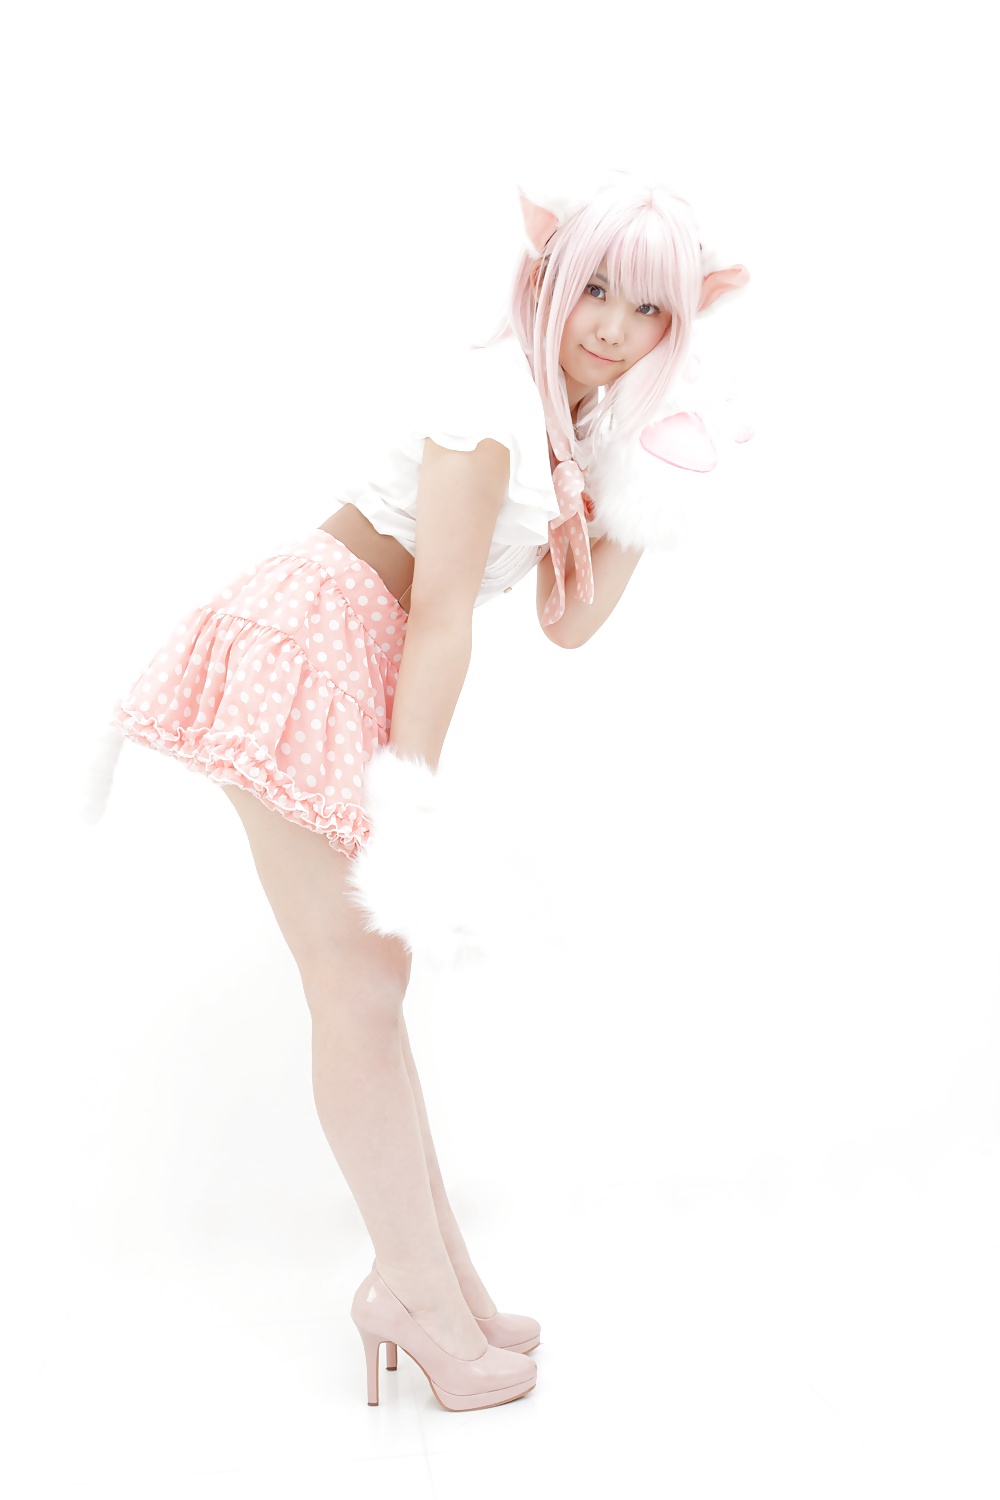 Asiatica cosplay in bianco
 #26558591